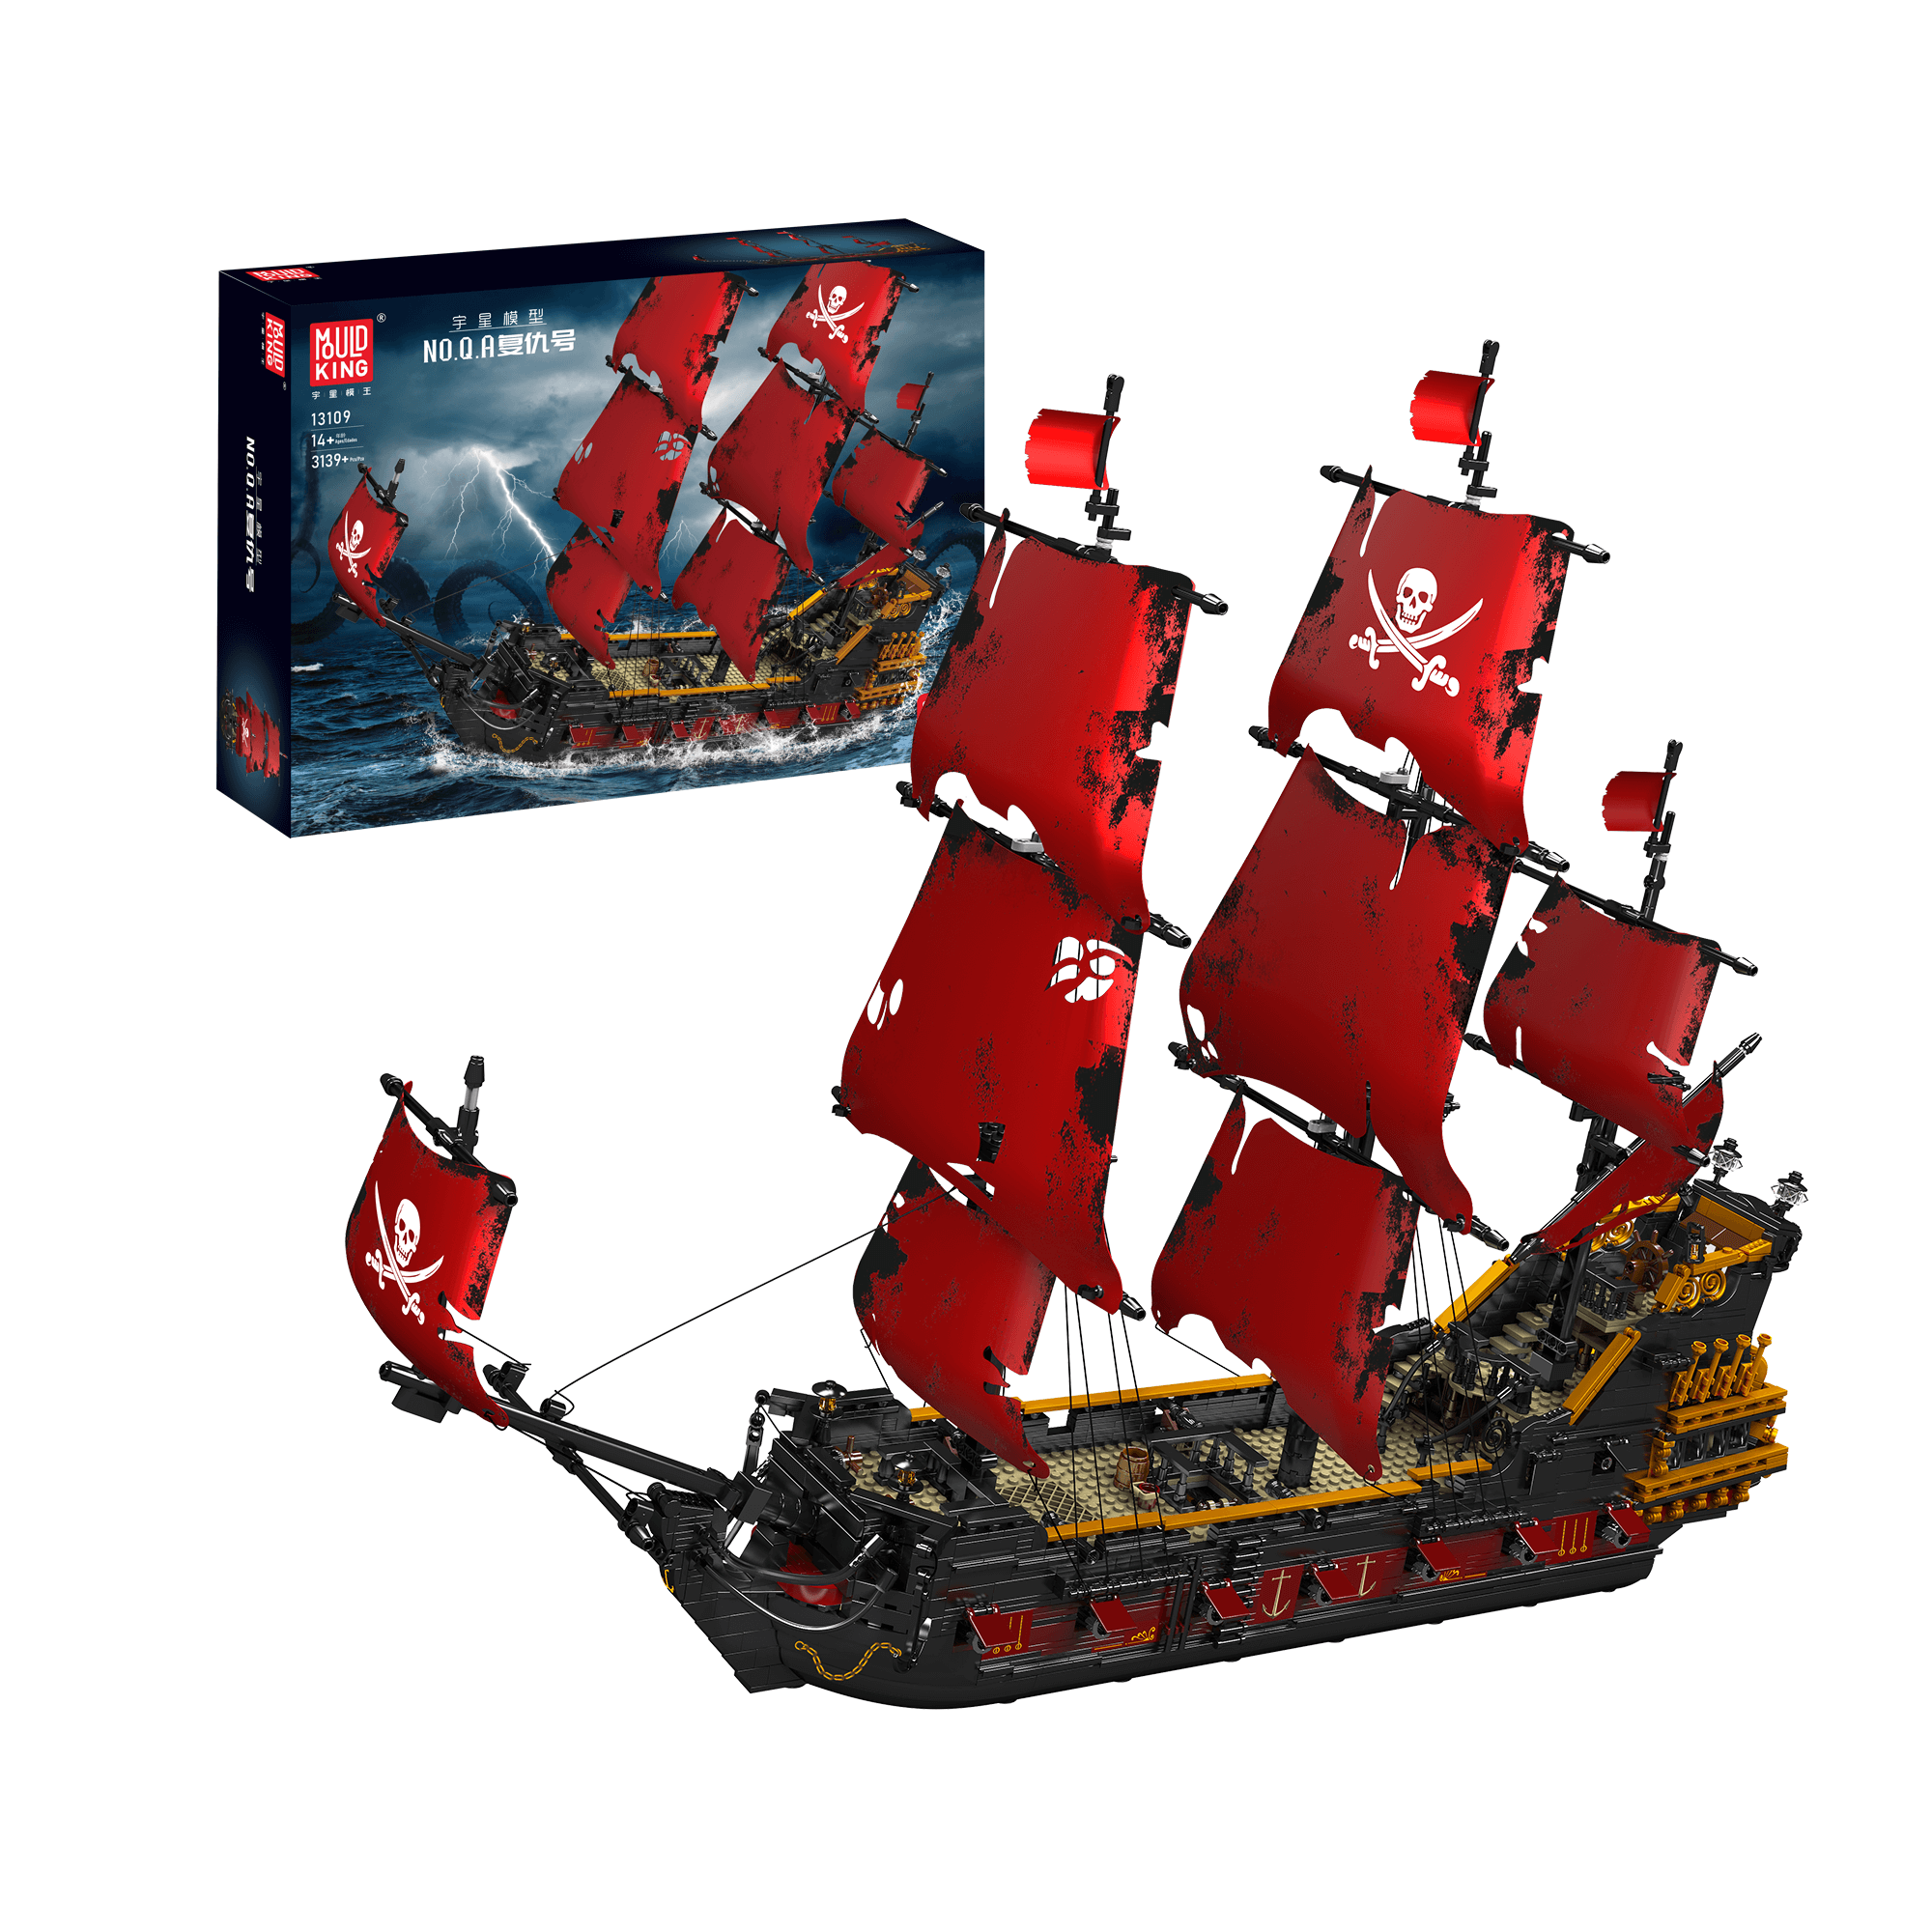 Mould King 13109 Queen Pirate Ship Model Building Set